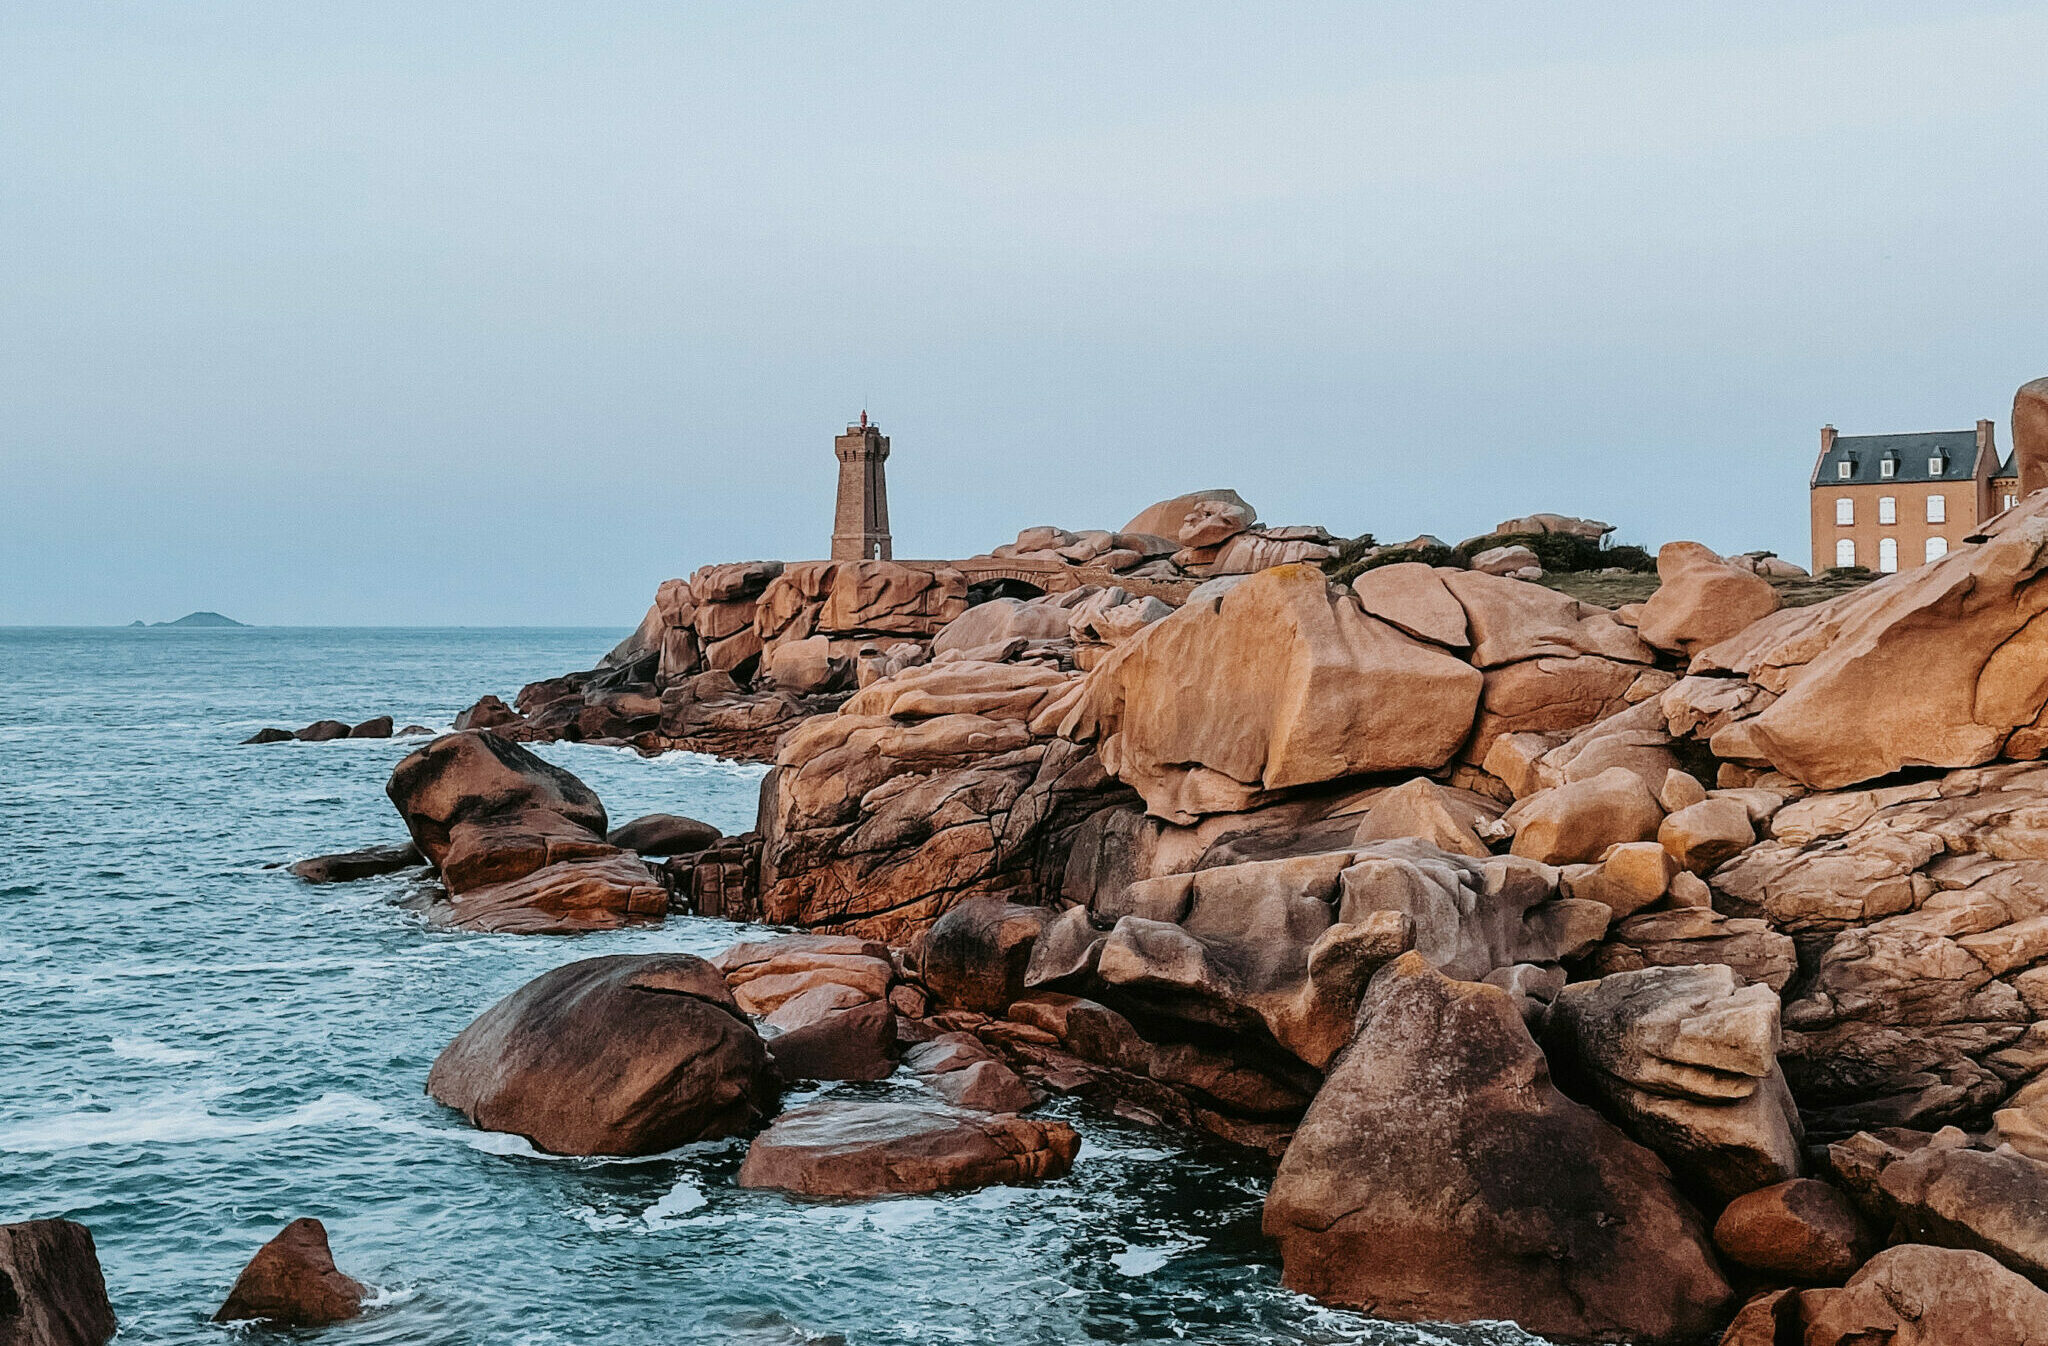 The lighthouse of Ploumanac'h in Perros-Guirec on the Pink Granite Coast